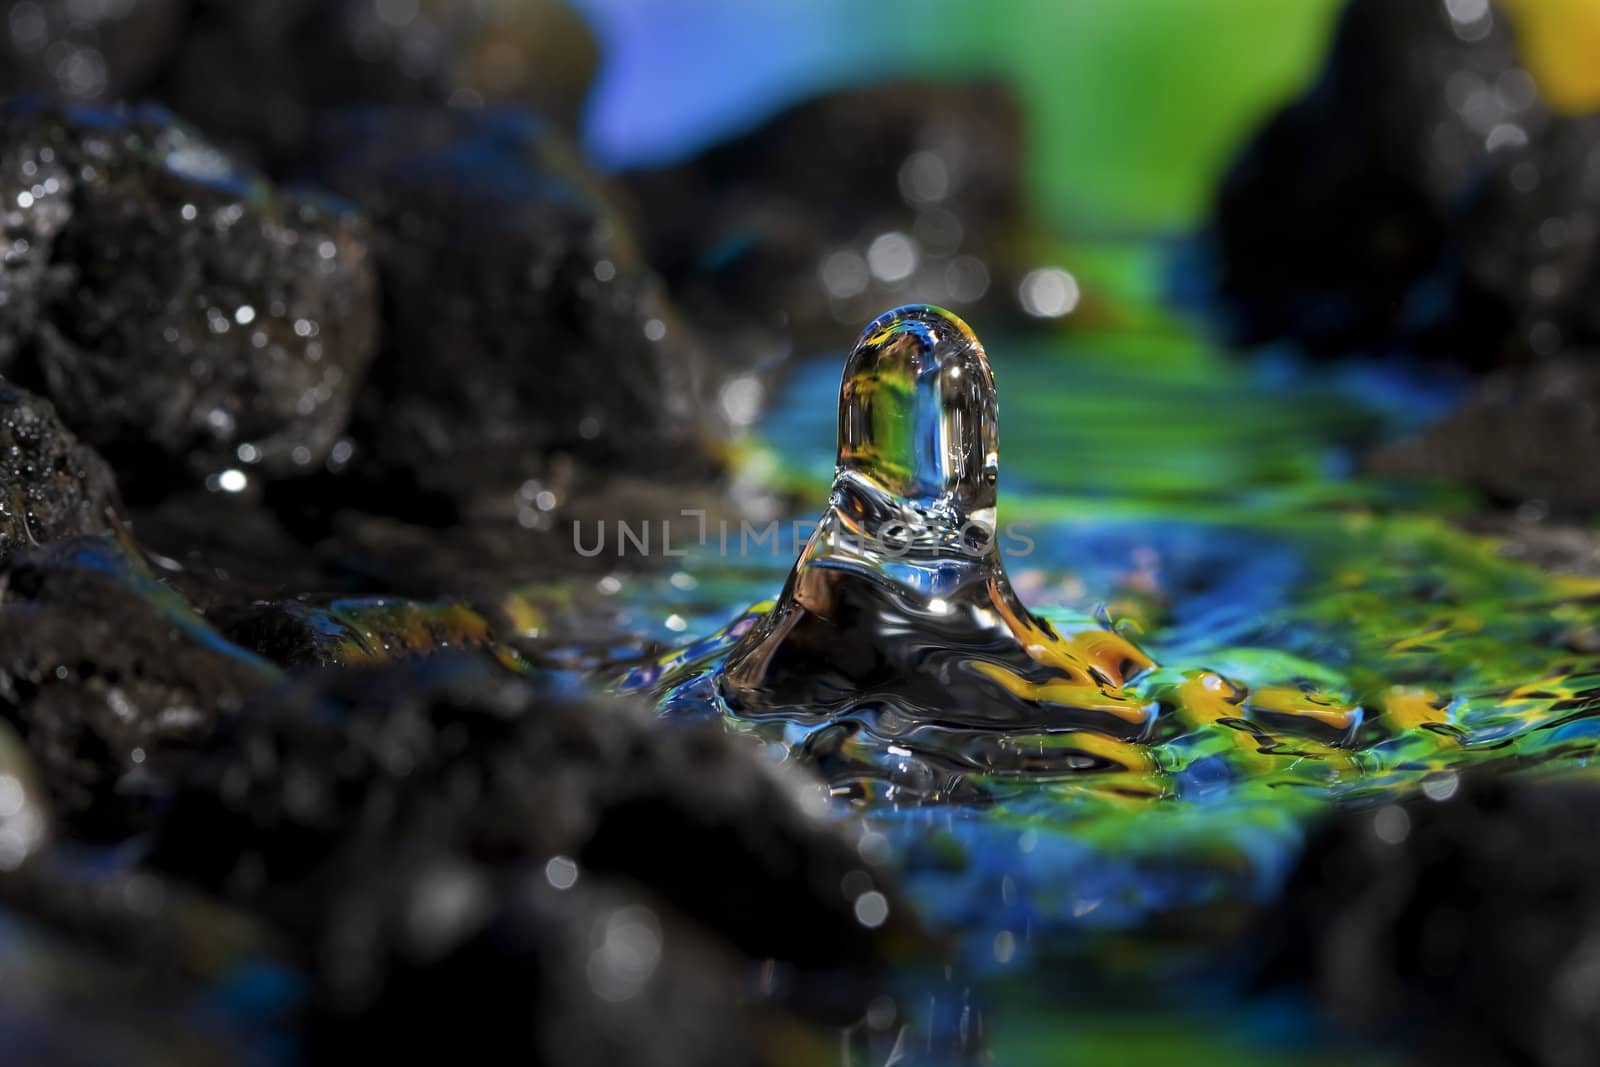 Colorful and Creative Water Drop Creations made into art.